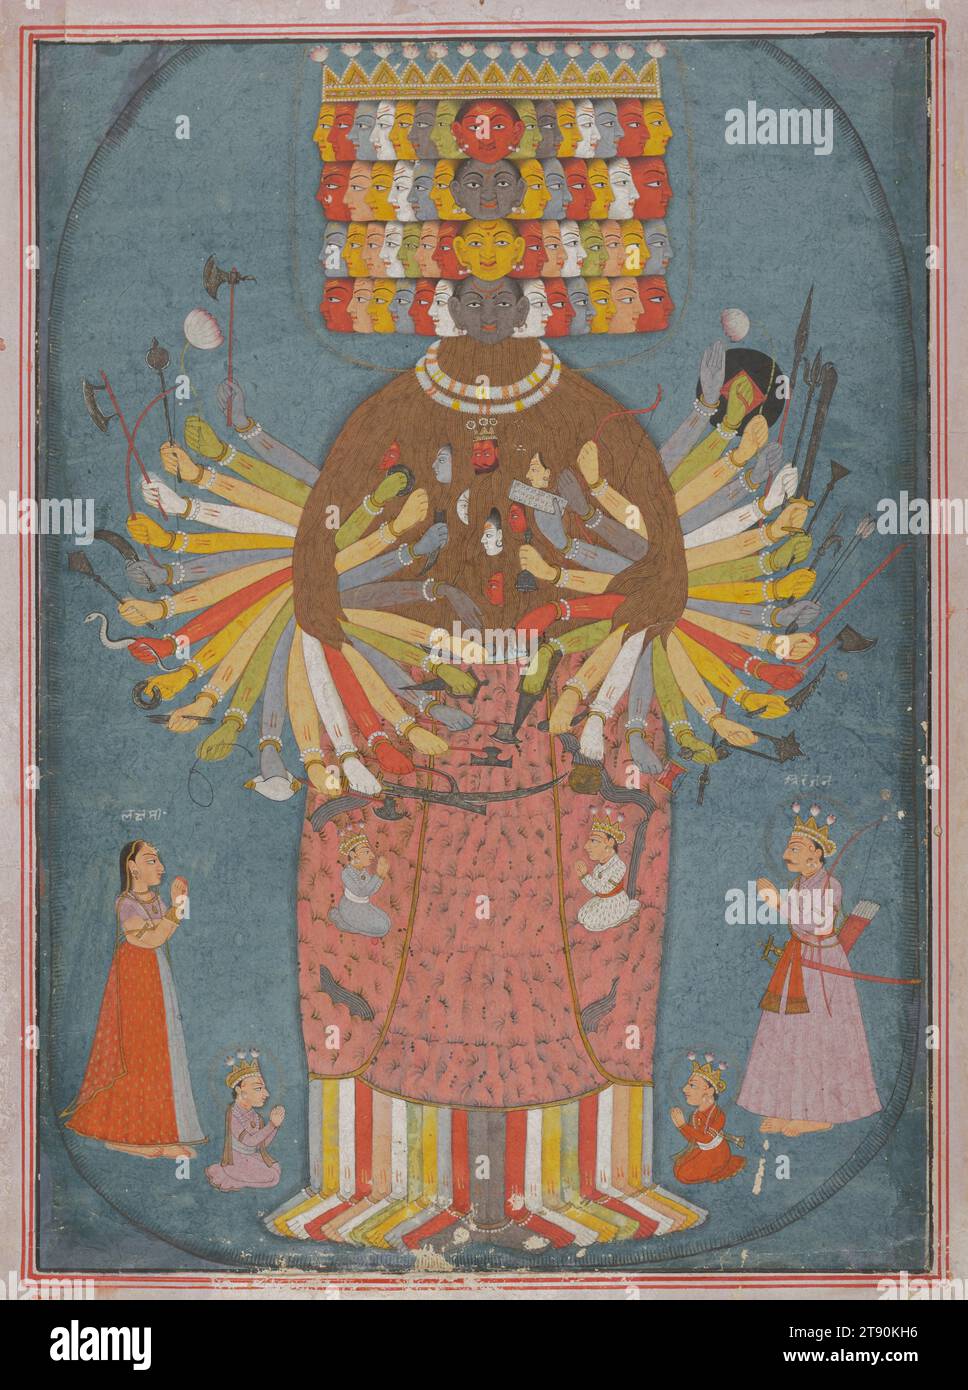 The Cosmic Form of Krishna, c. 1750-1775, 10 7/8 × 7 7/8 in. (27.62 × 20 cm) (image)25 1/2 × 21 3/4 × 1 in. (64.77 × 55.25 × 2.54 cm) (outer frame), Opaque watercolor heightened with gold on paper, India, 18th century, The striking imagery of this painting was inspired by the Bhagavata Gita (200 BCE-300 CE), a foundational text in Hinduism that lays out key moral doctrines and emphasizes personal devotion (bhakti) to God. Here, the artist illustrates a pivotal conversation between the epic hero, Arjuna (identified by inscription in the bottom left) and Krishna Stock Photo